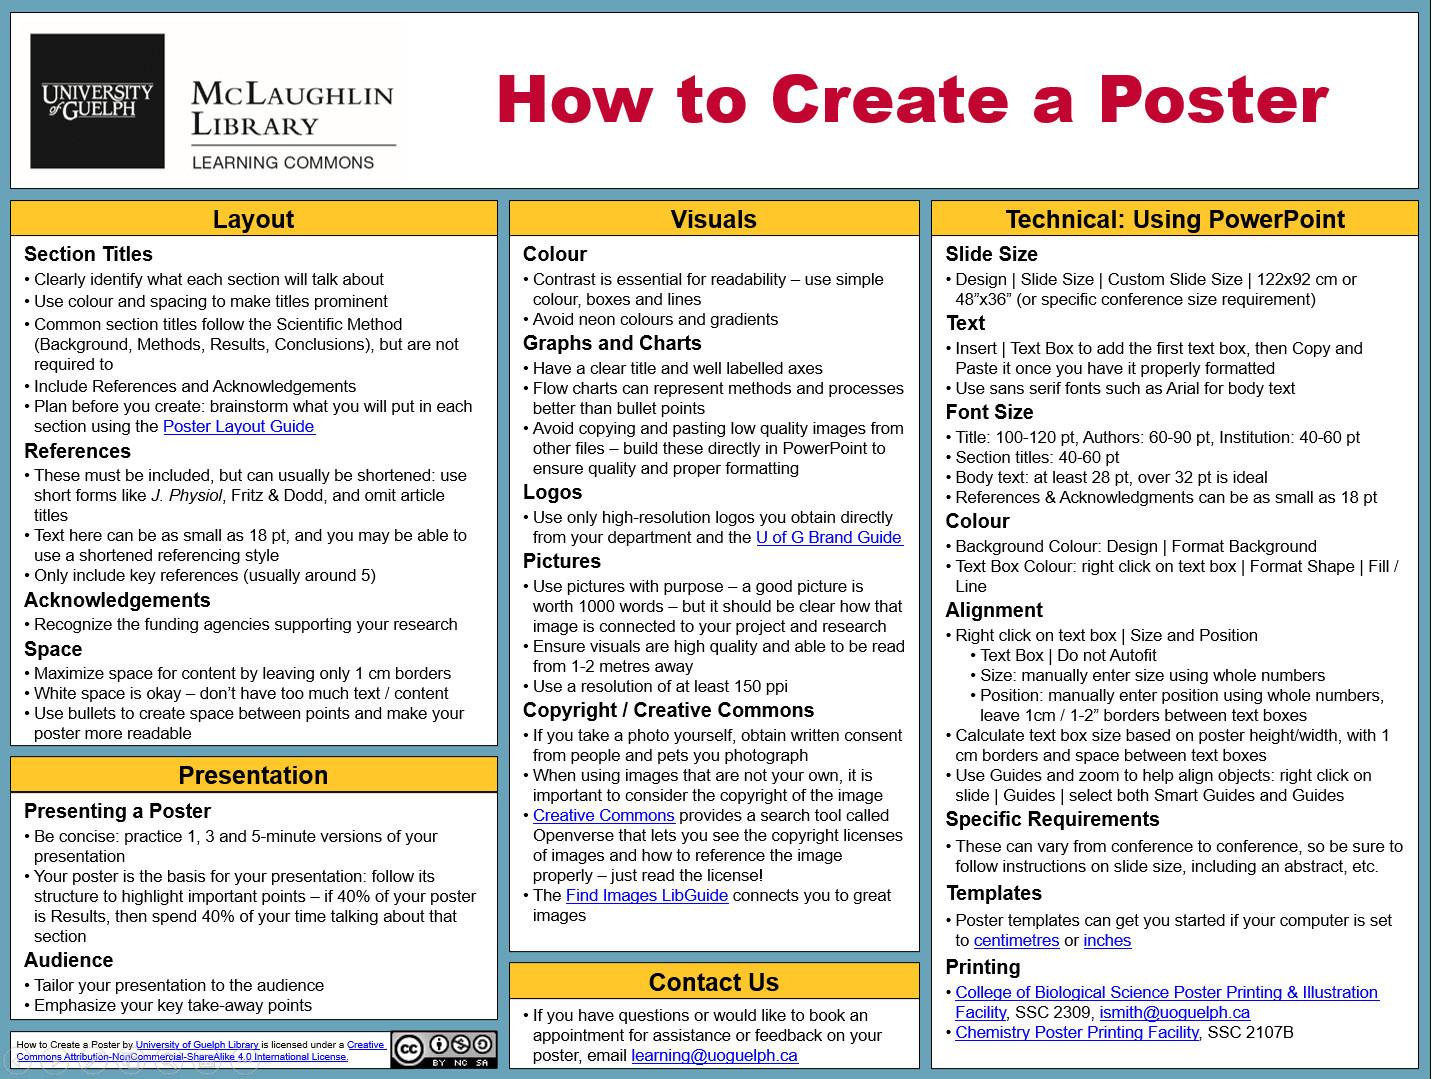 How to create a Poster. See download for accessible version